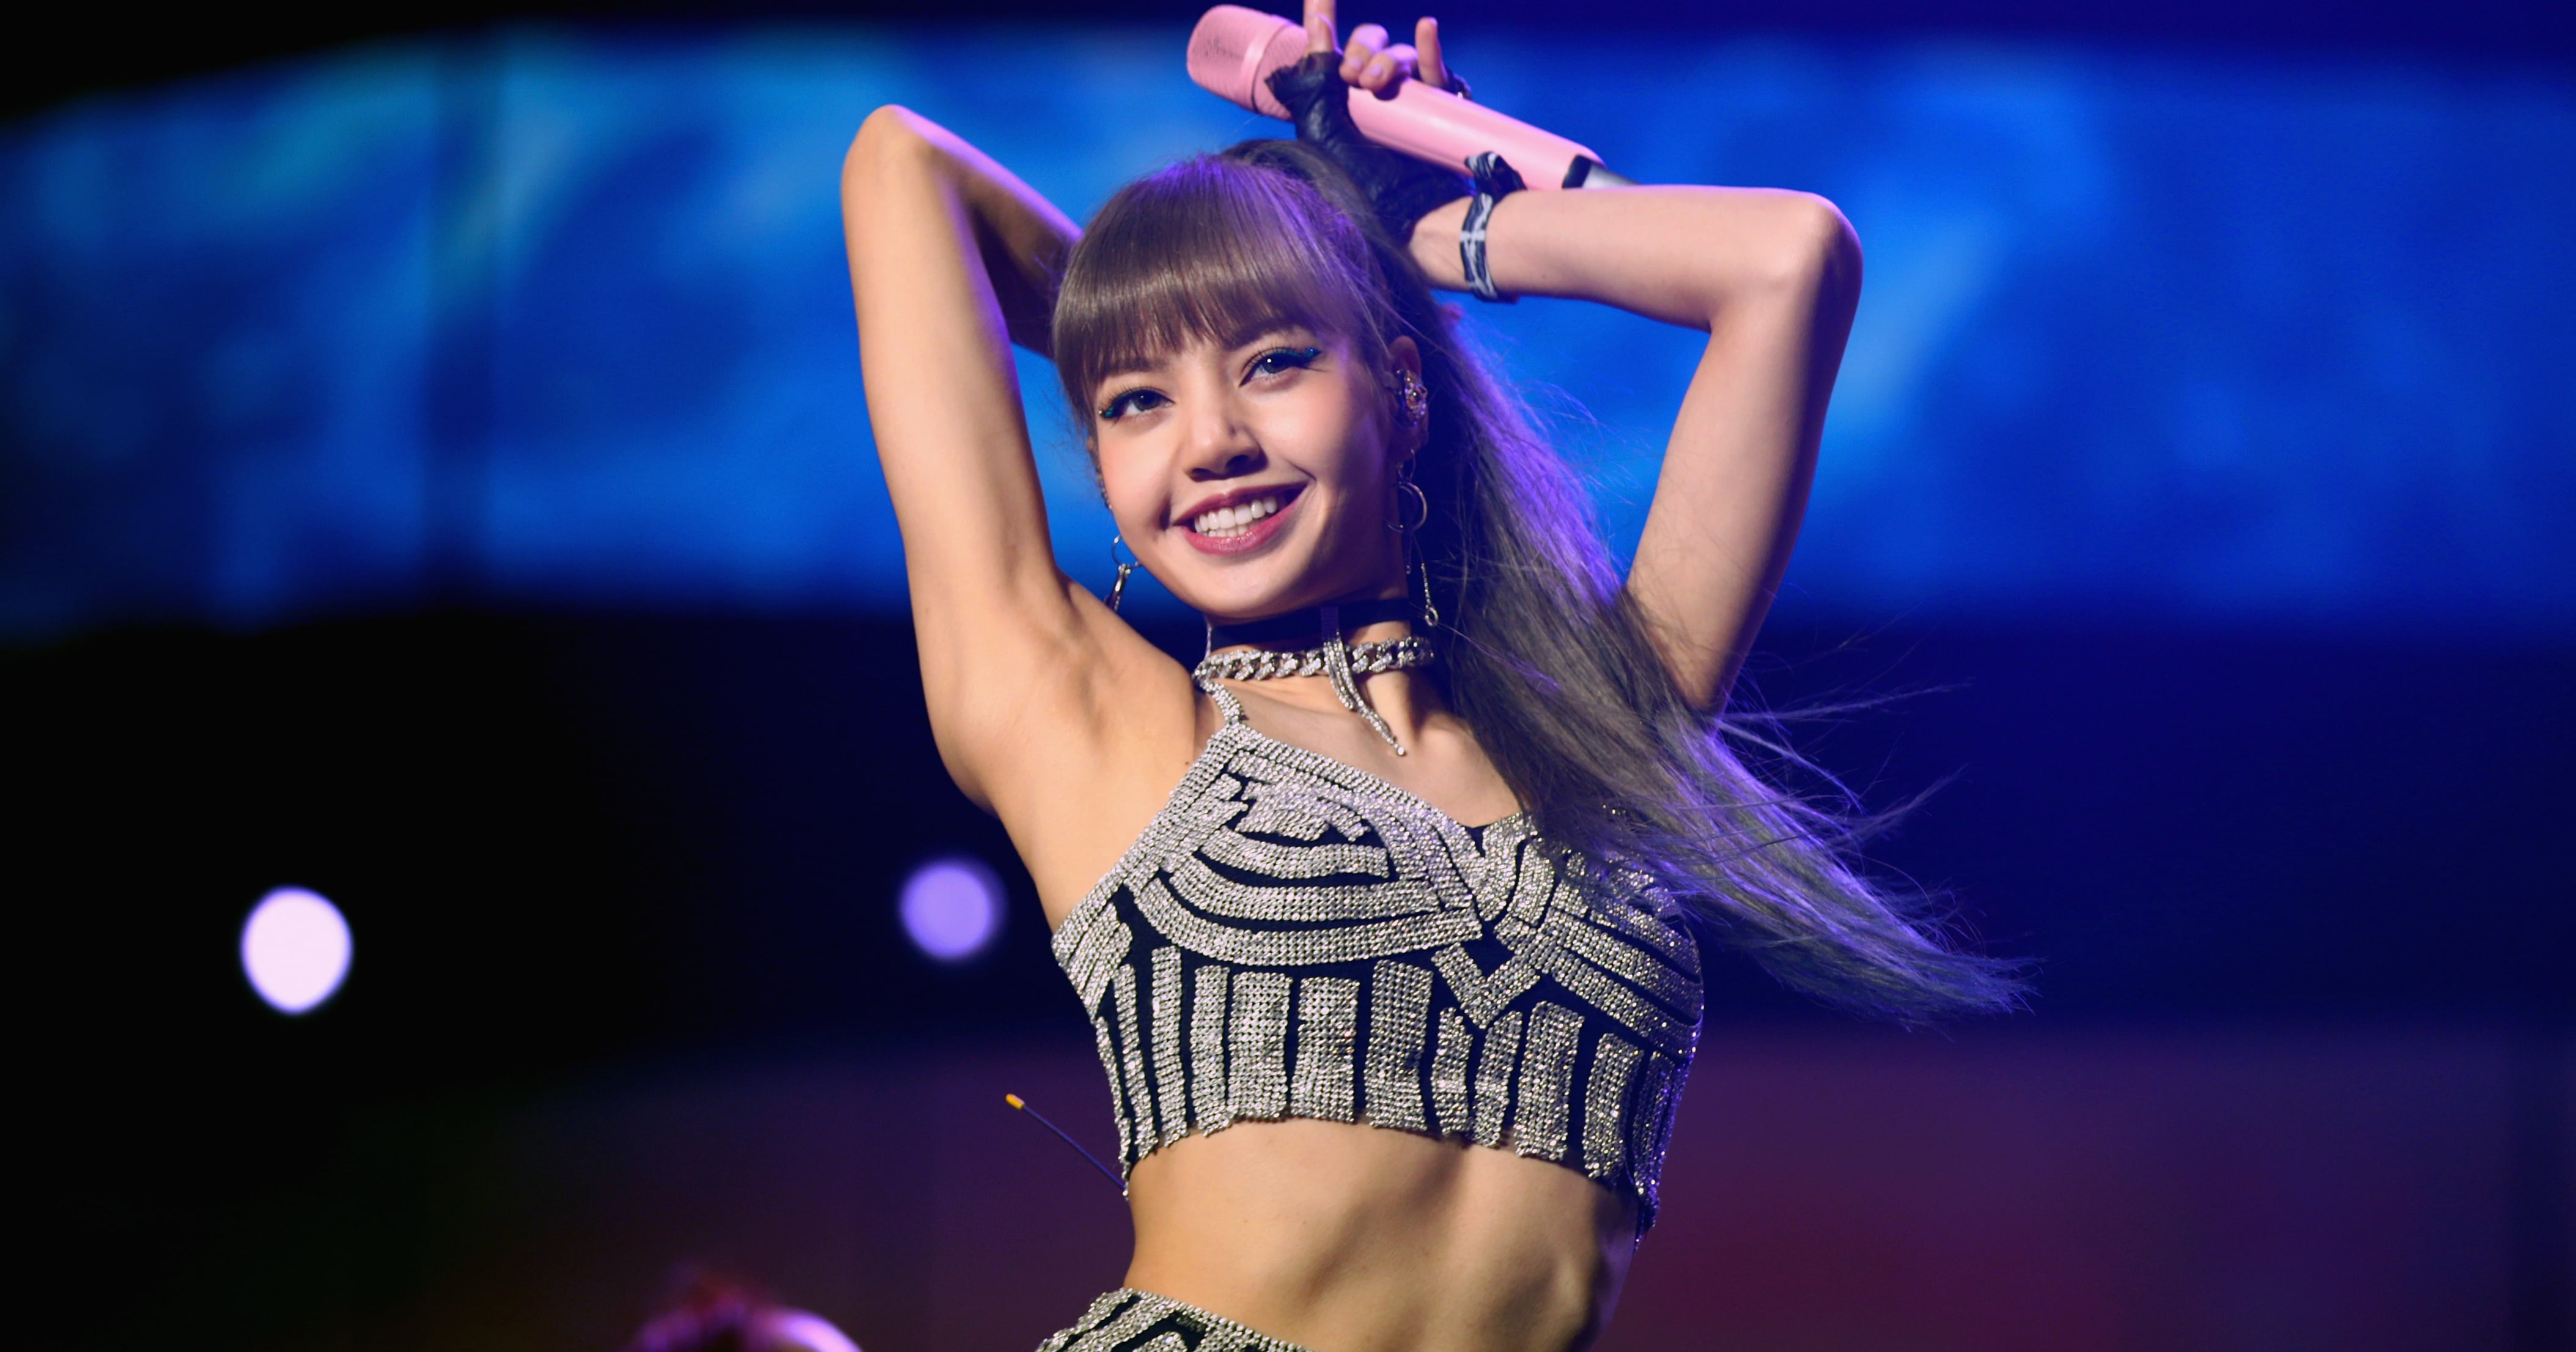 BLACKPINK's Lisa Is Super Serious About Her Relationship With